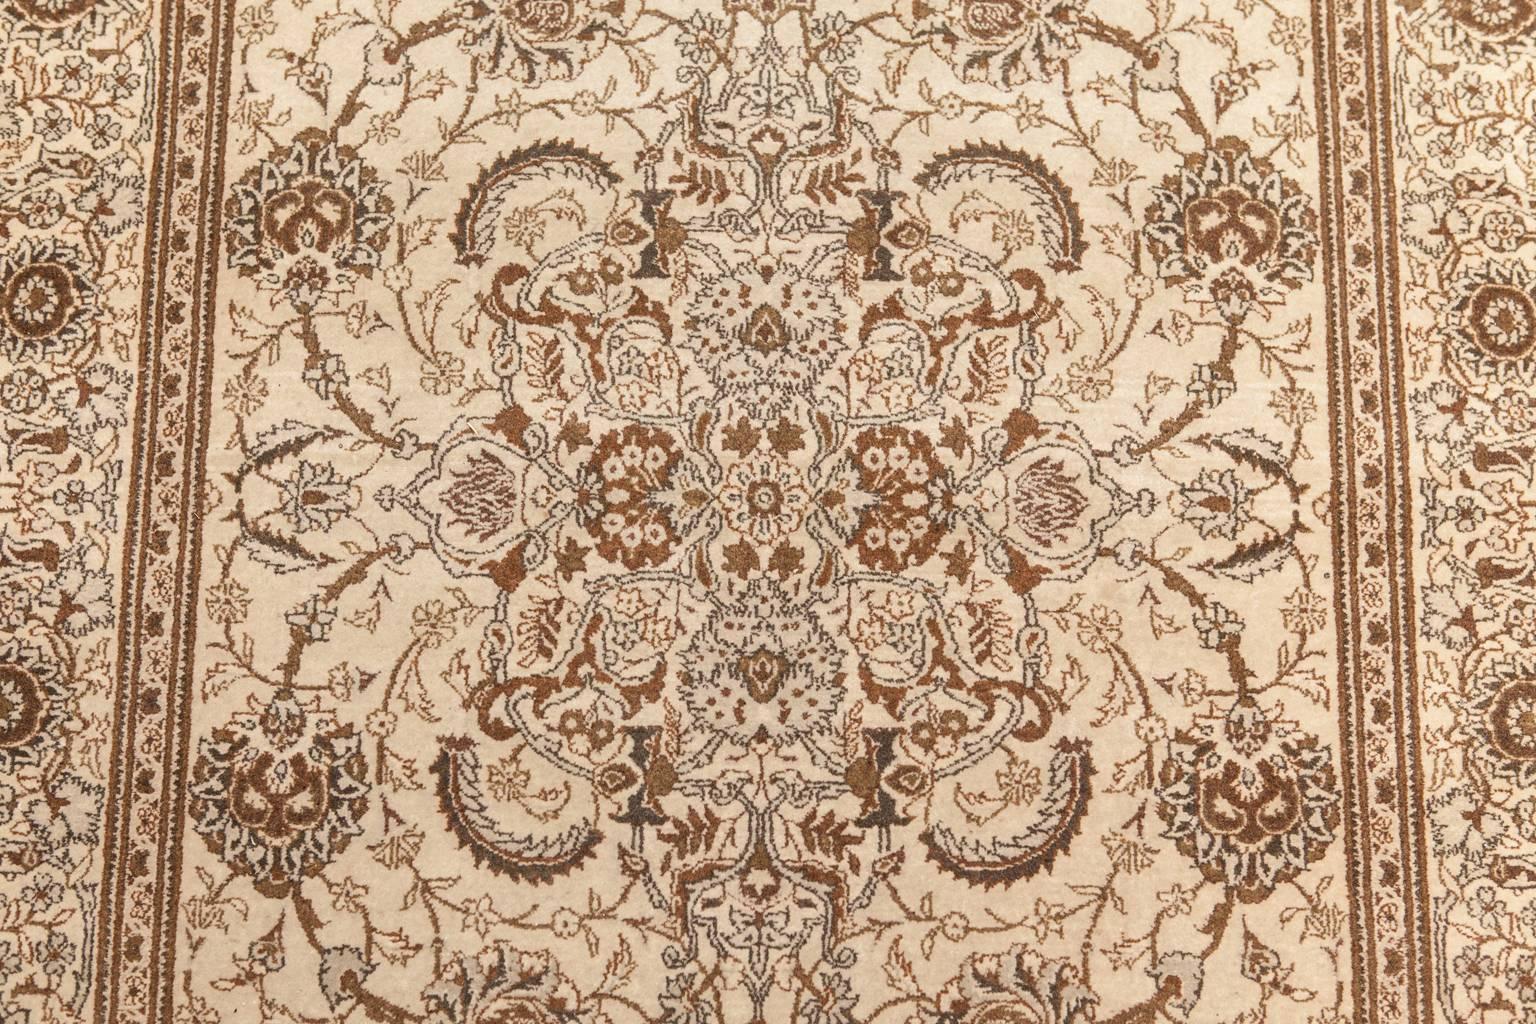 Elegant vintage Persian Qum rug made of hand-knotted wool featuring an amazing intricate scrolling vine pattern with a lovely faded patina. Very subtle grey shading can be seen in the delicate leaves and foliage patterns over a cream ground.